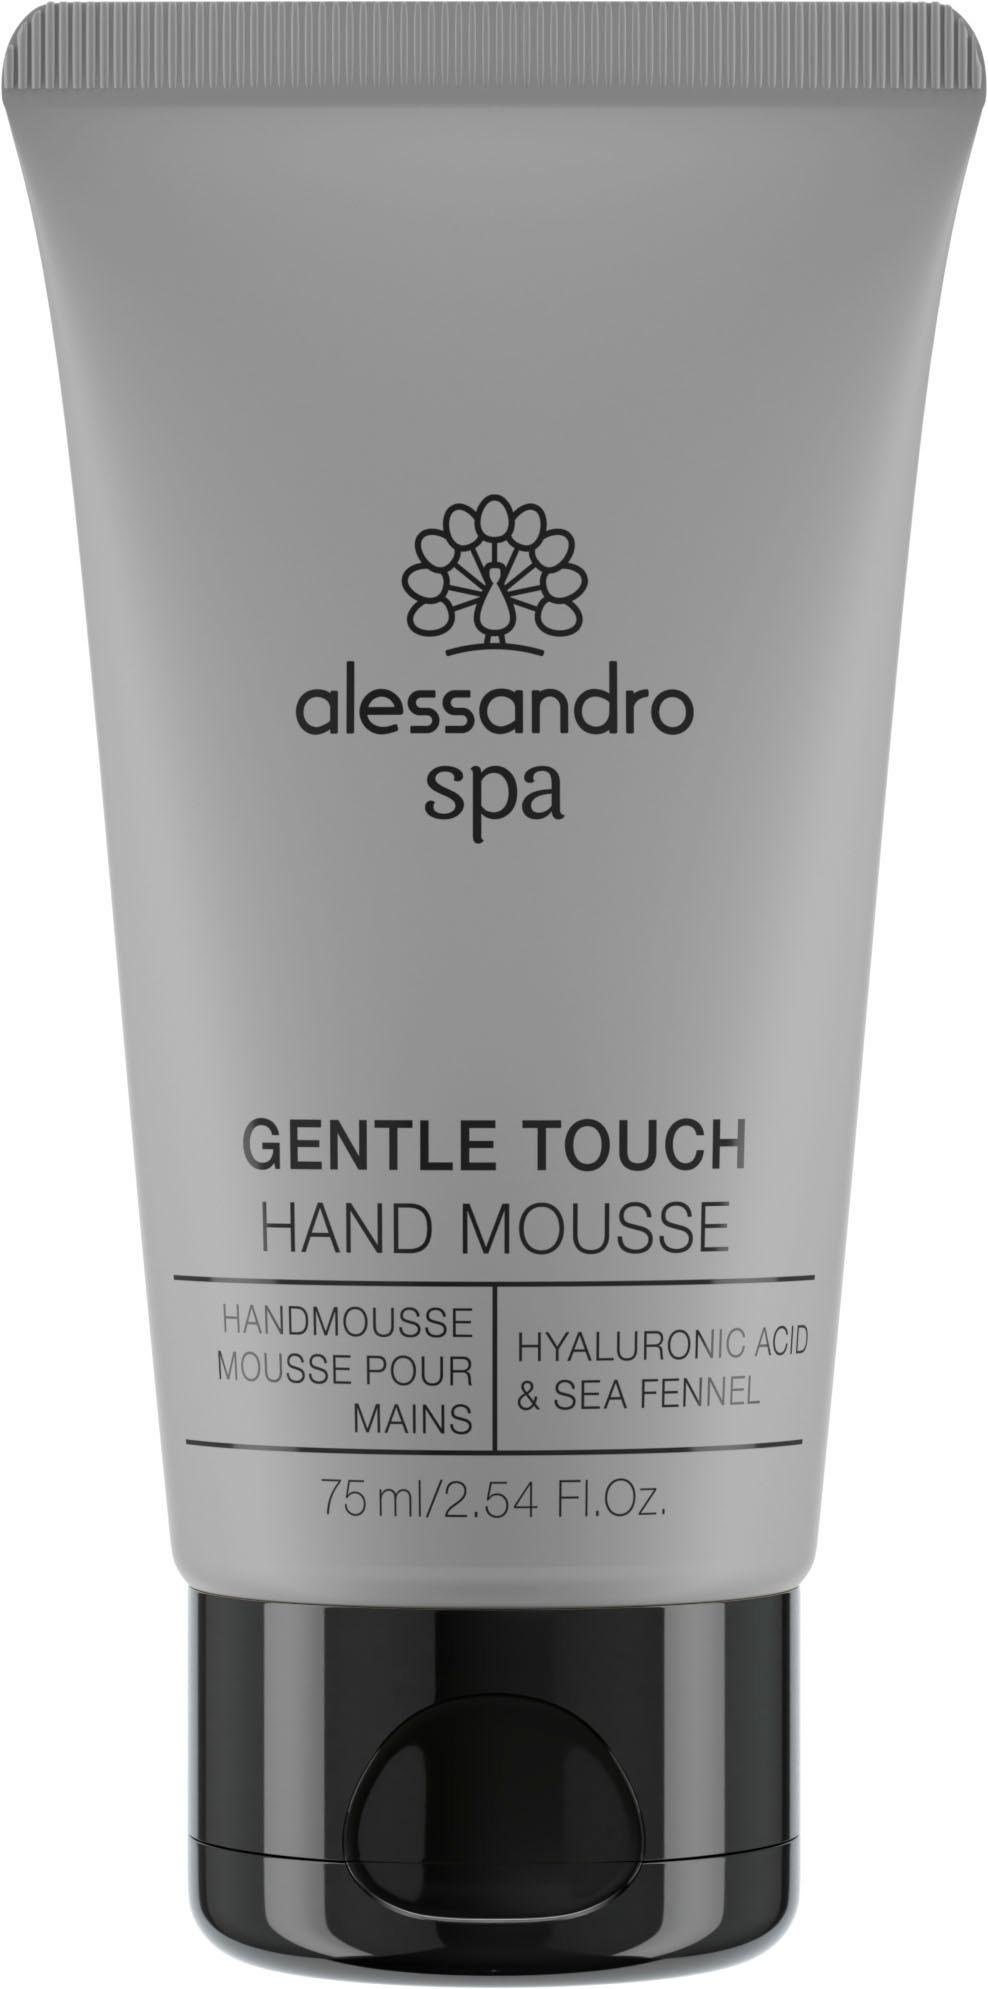 alessandro international Handmousse GENTLE TOUCH SPA